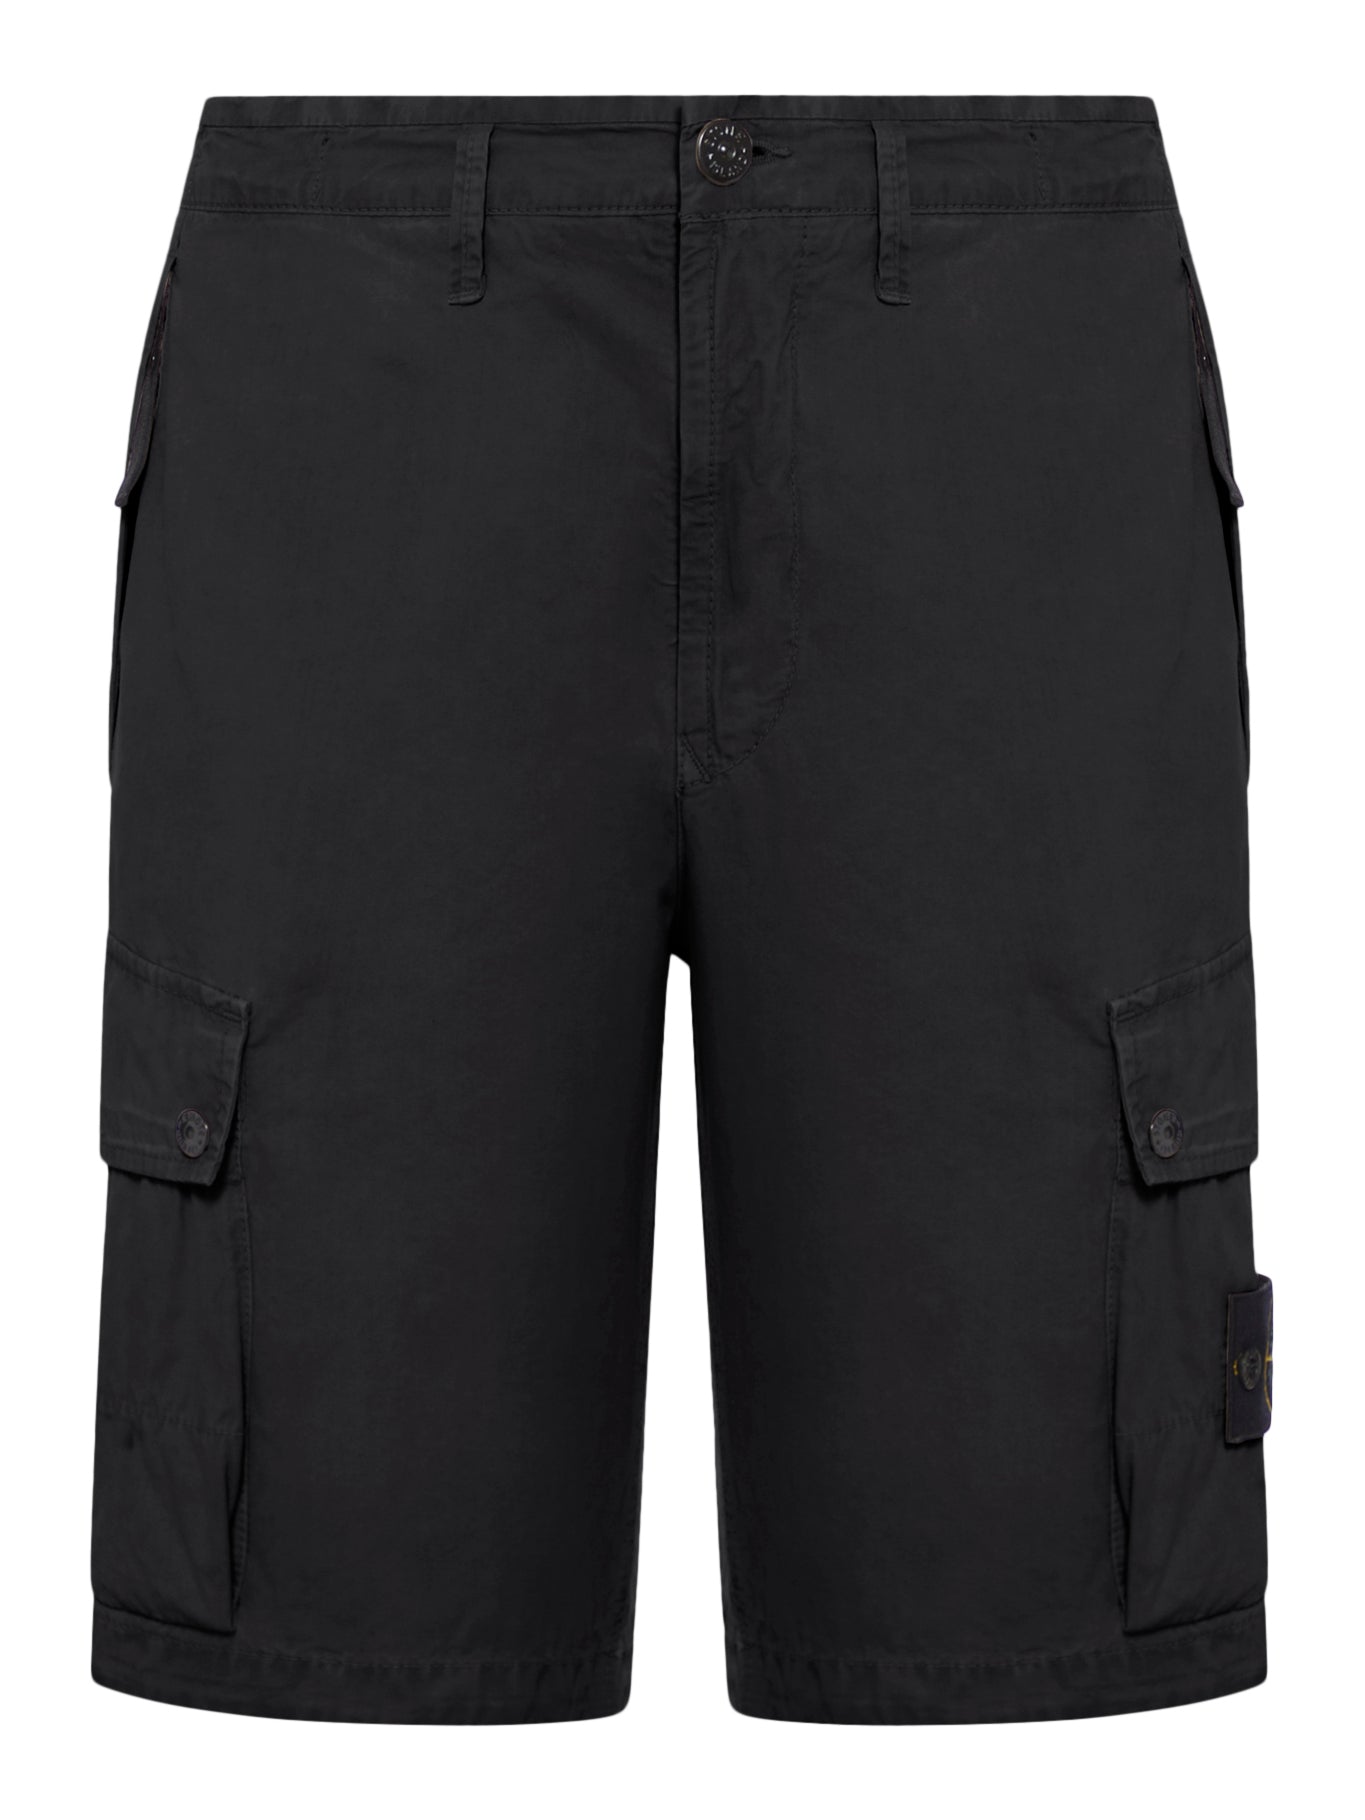 CARGO Bermuda shorts WITH LOGO PATCH AND POCKETS